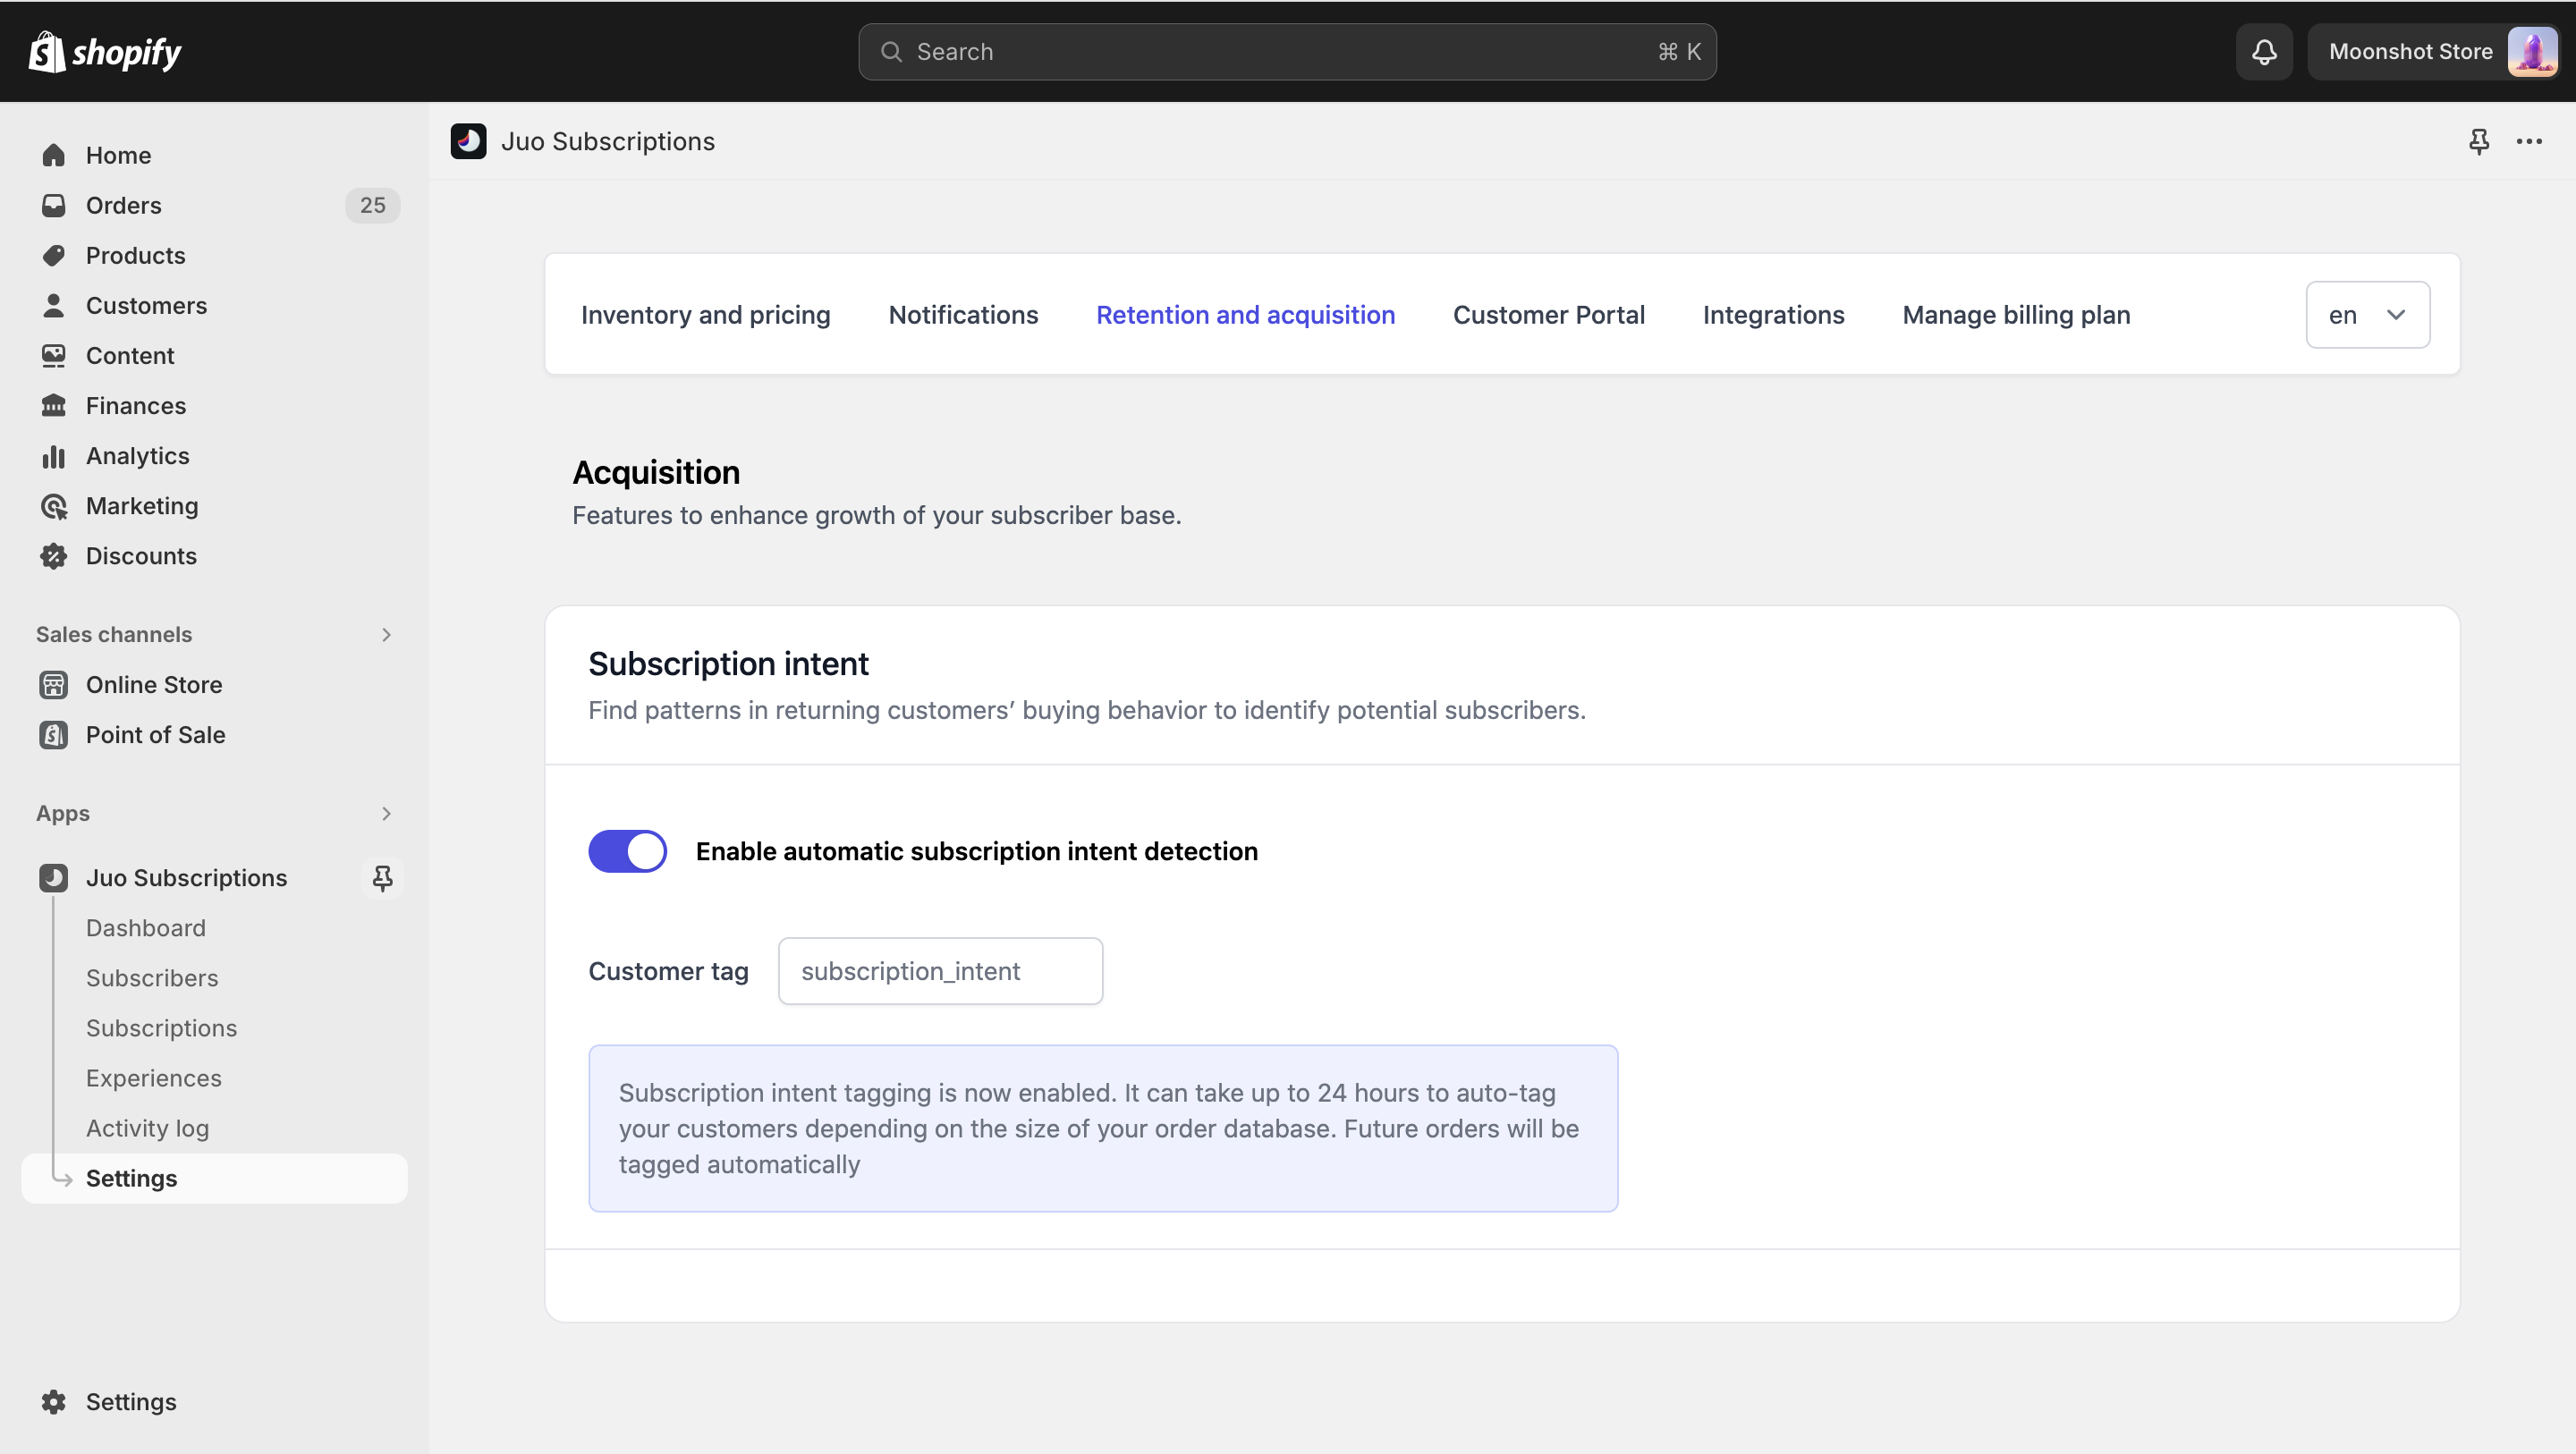 Global settings view - Subscription intent detection